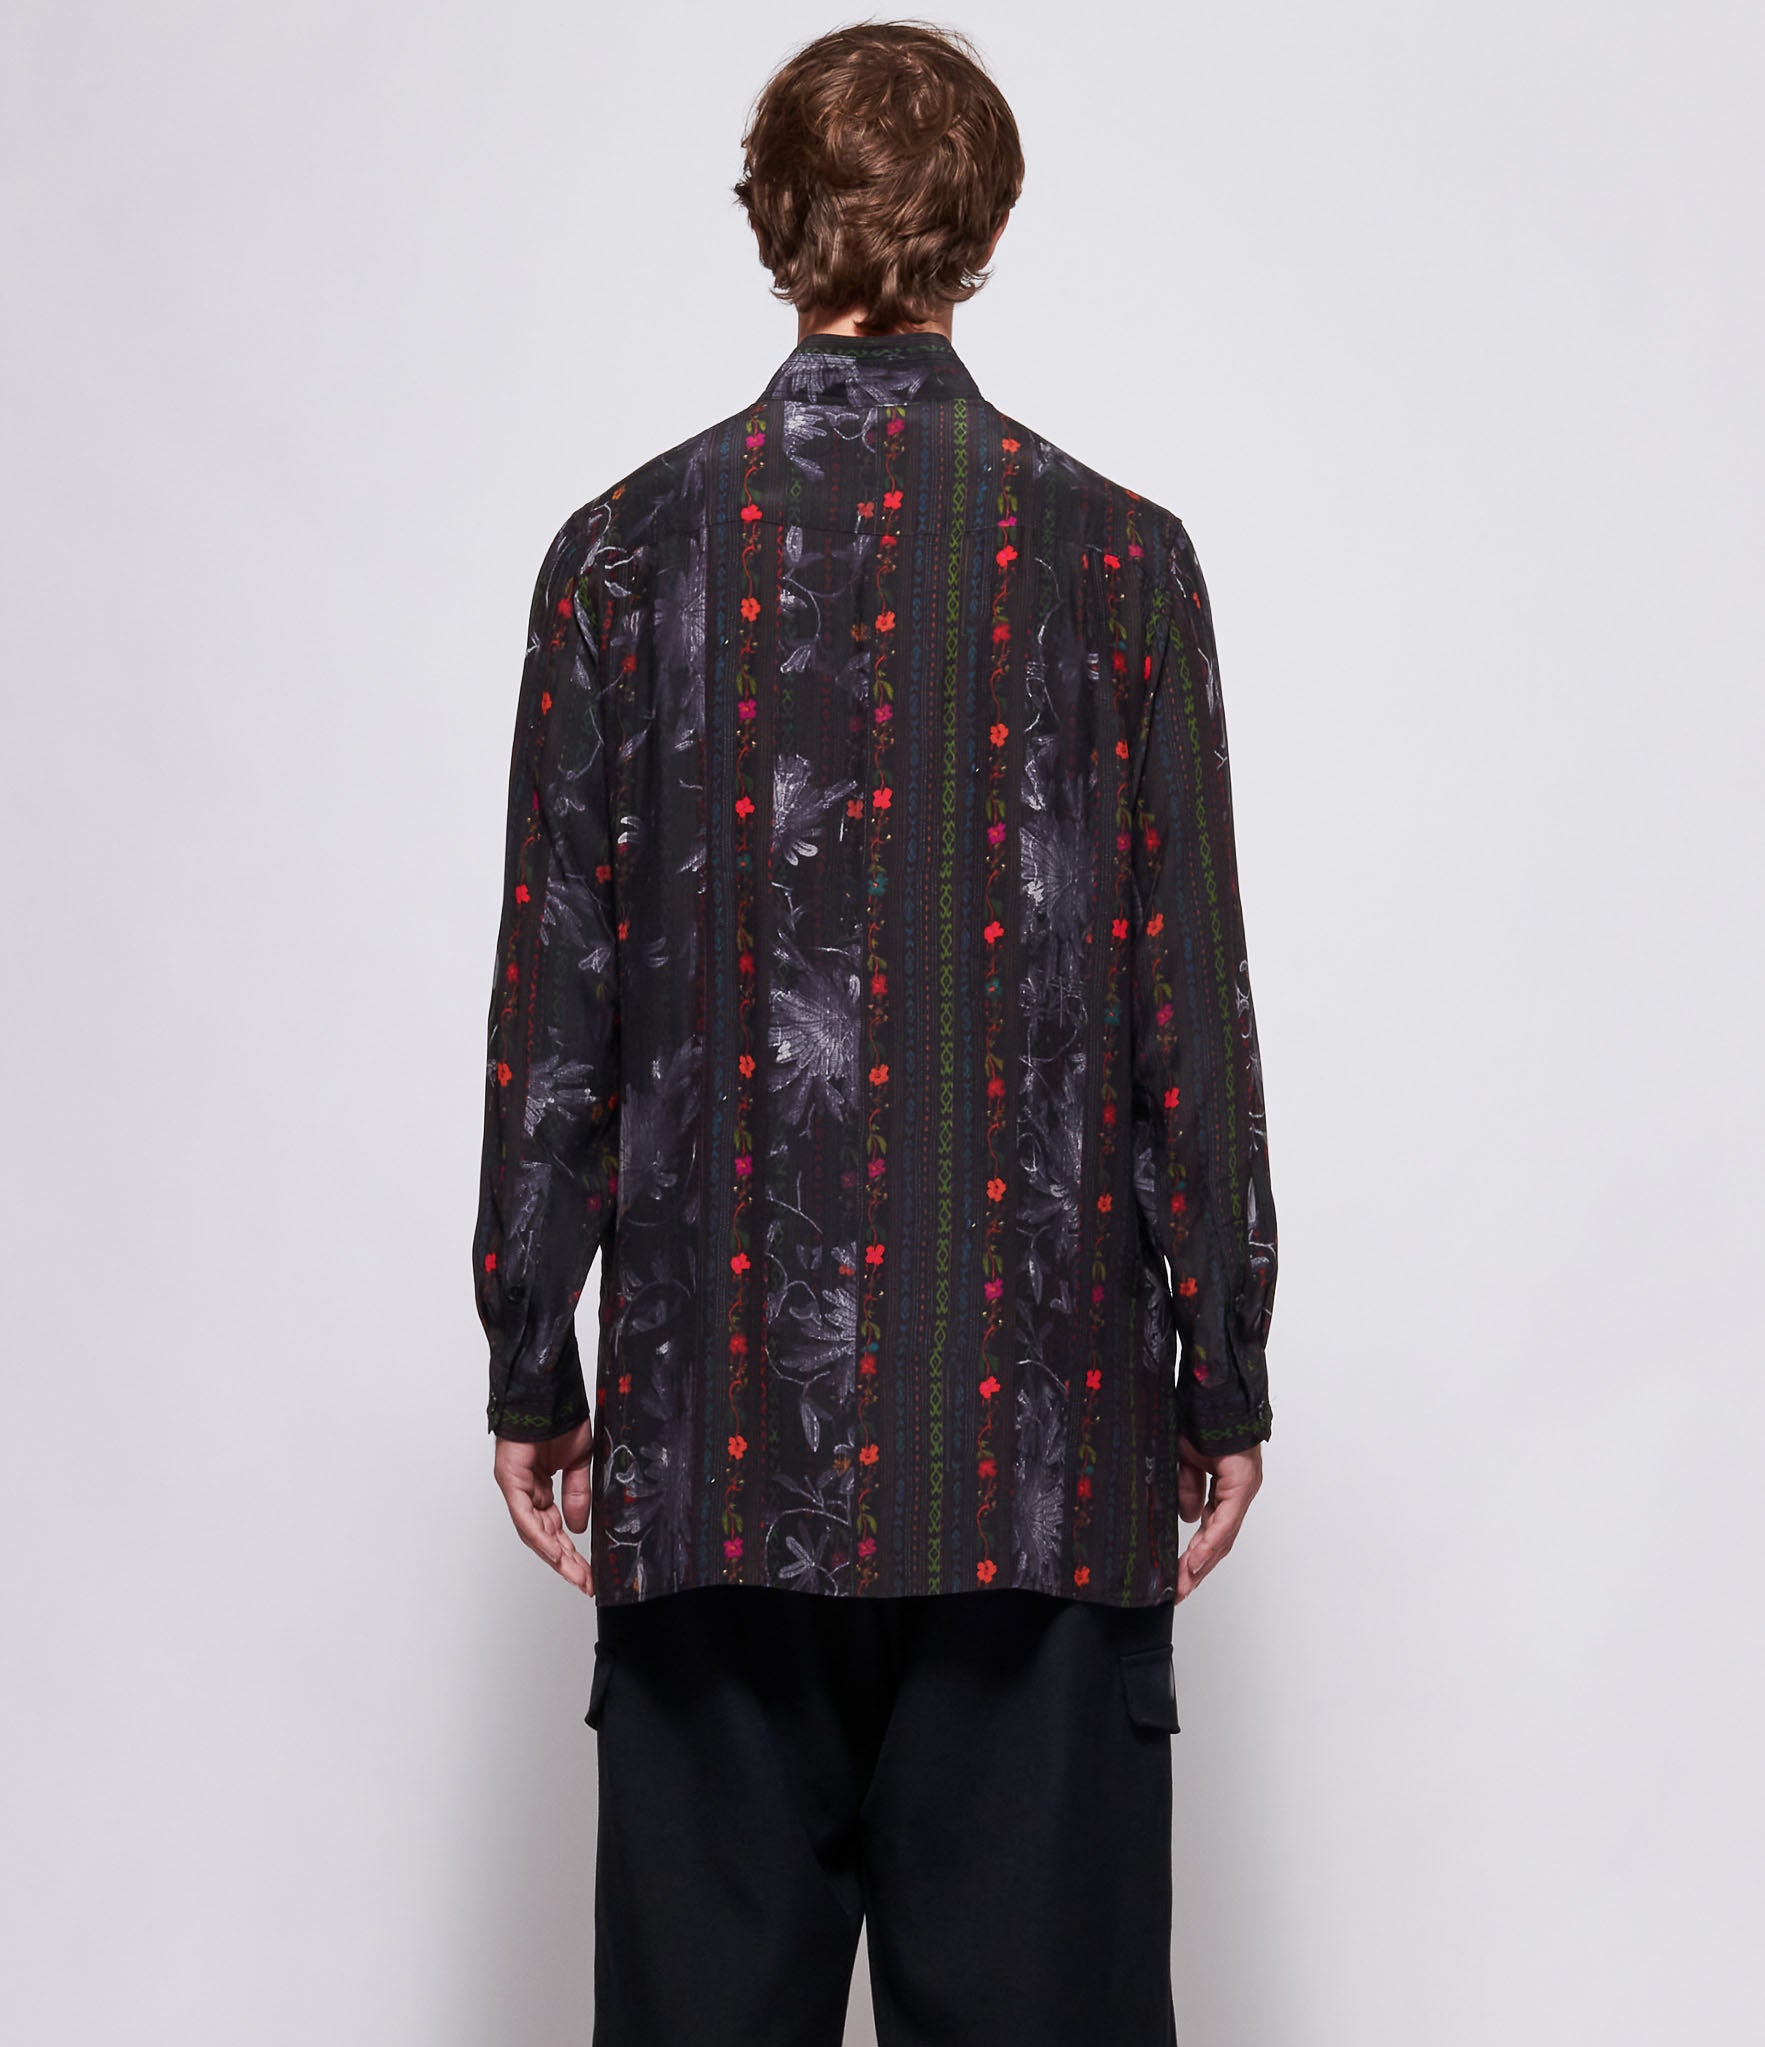 Yohji Yamamoto Pour Homme A-Ethnic 6 Stand Blouse